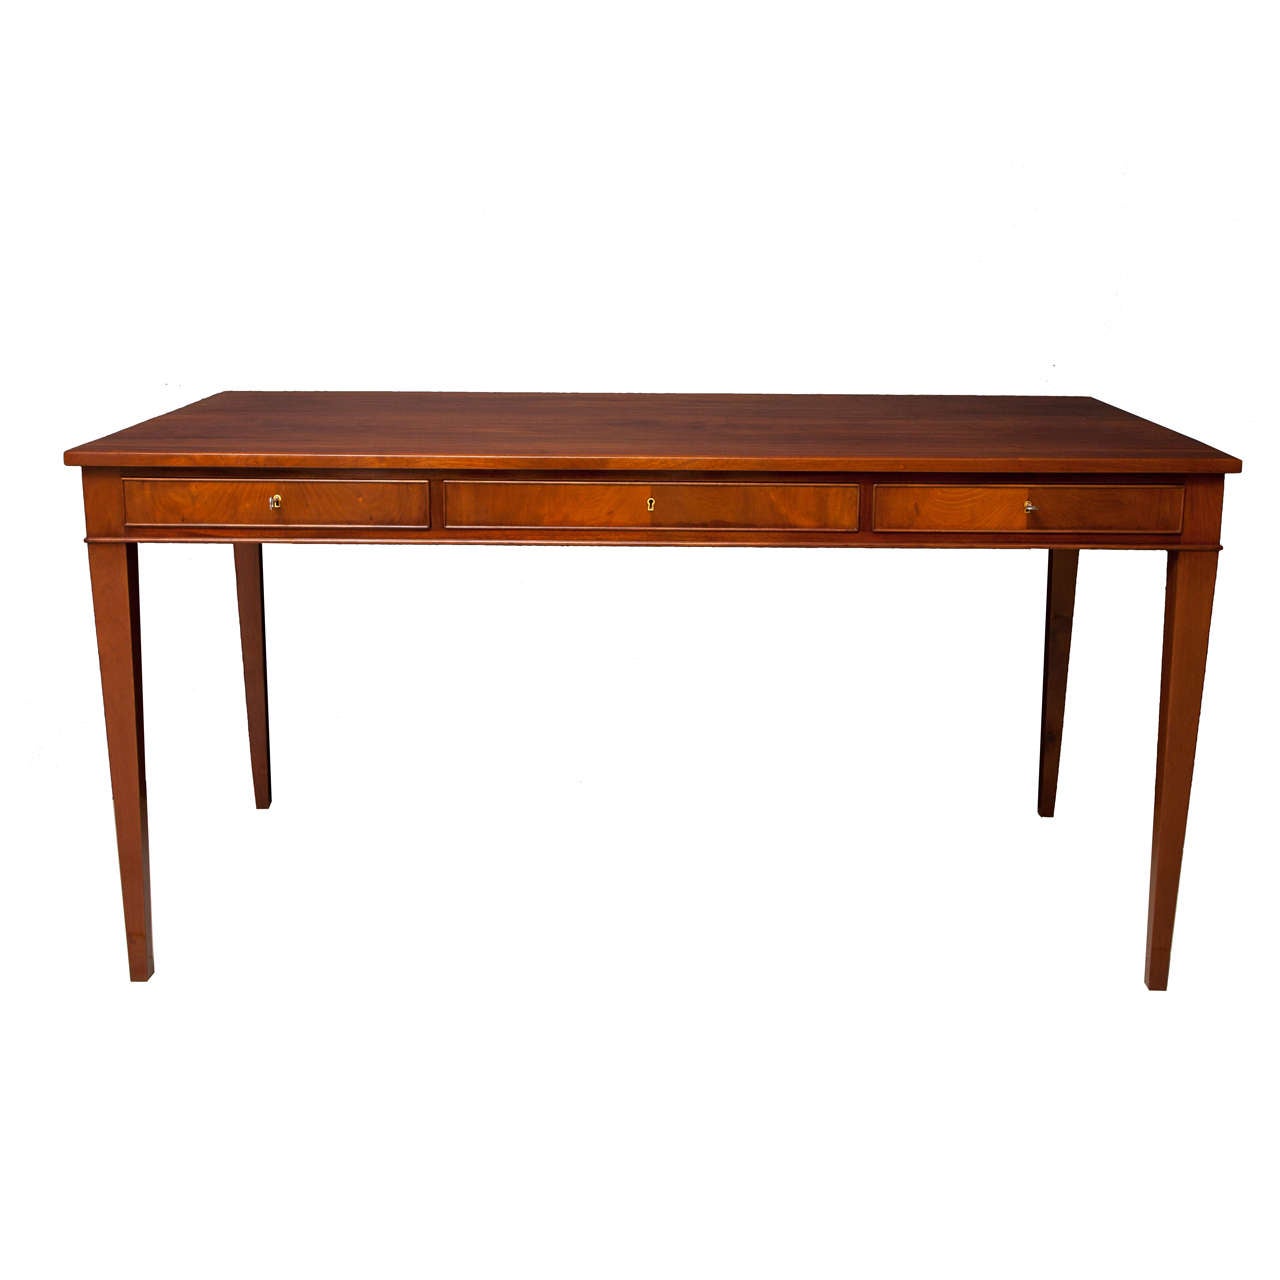 A Danish mahogany bureau-plat by Frits Henningsen, Furniture designer and Cabinet Maker (1889-1965). This desk is a classic example of Henningsen's elegant clean lines and use of quality woods with perfect balanced craftsmanship.

A rectangular